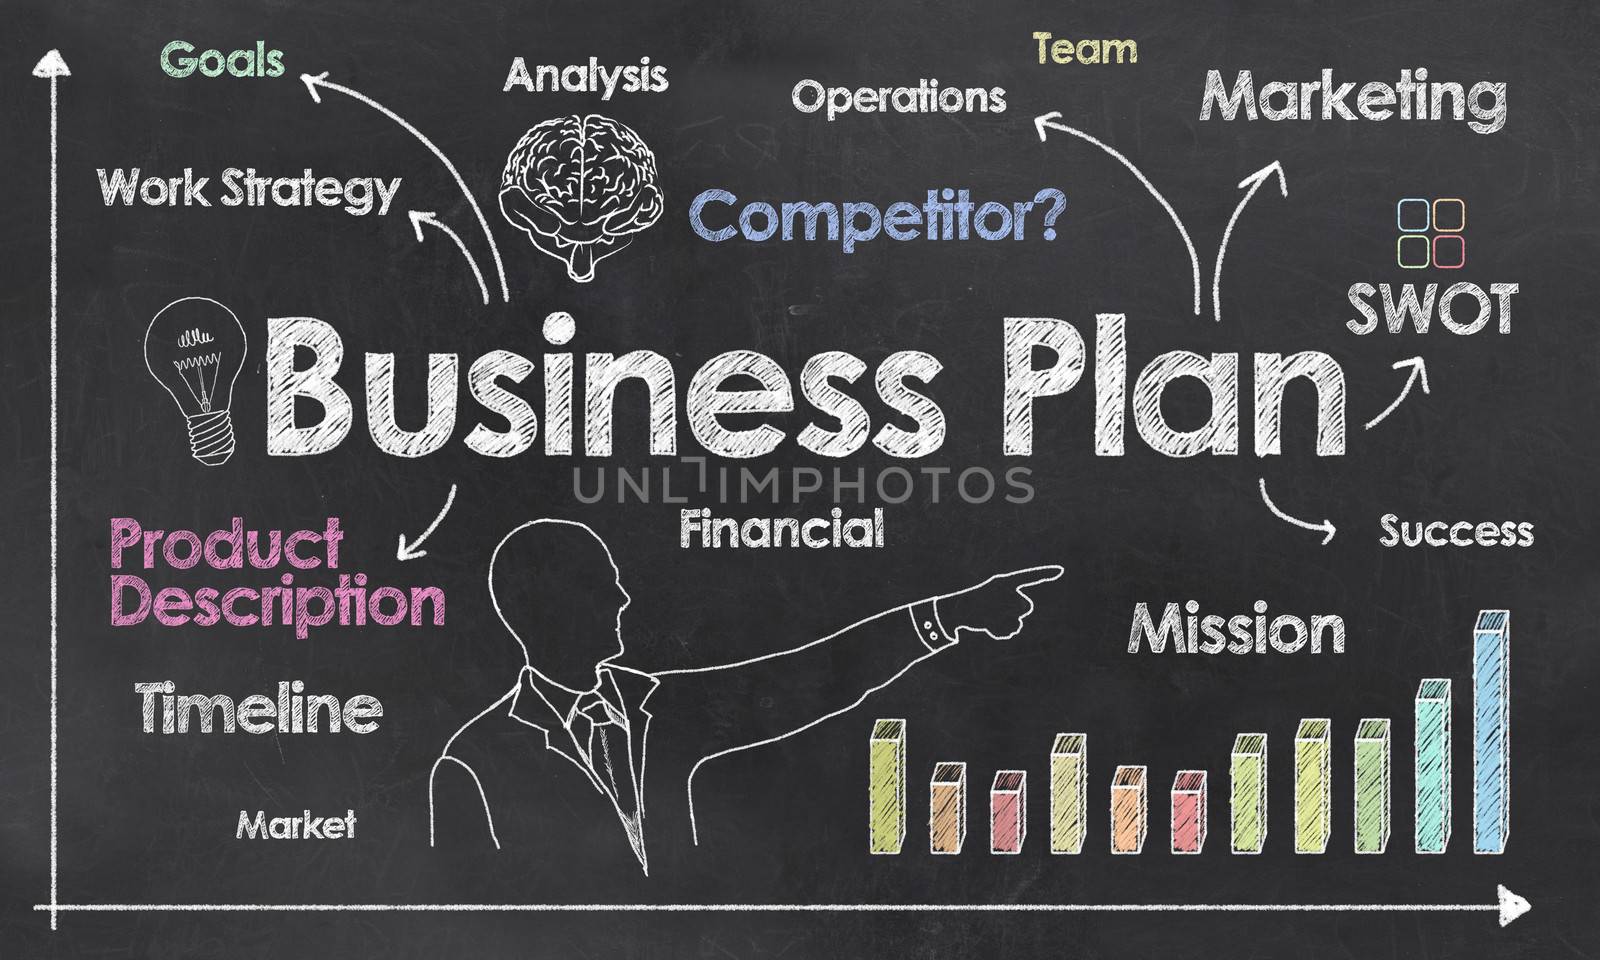 Business Plan with Creative Businessman showing Positive Growth